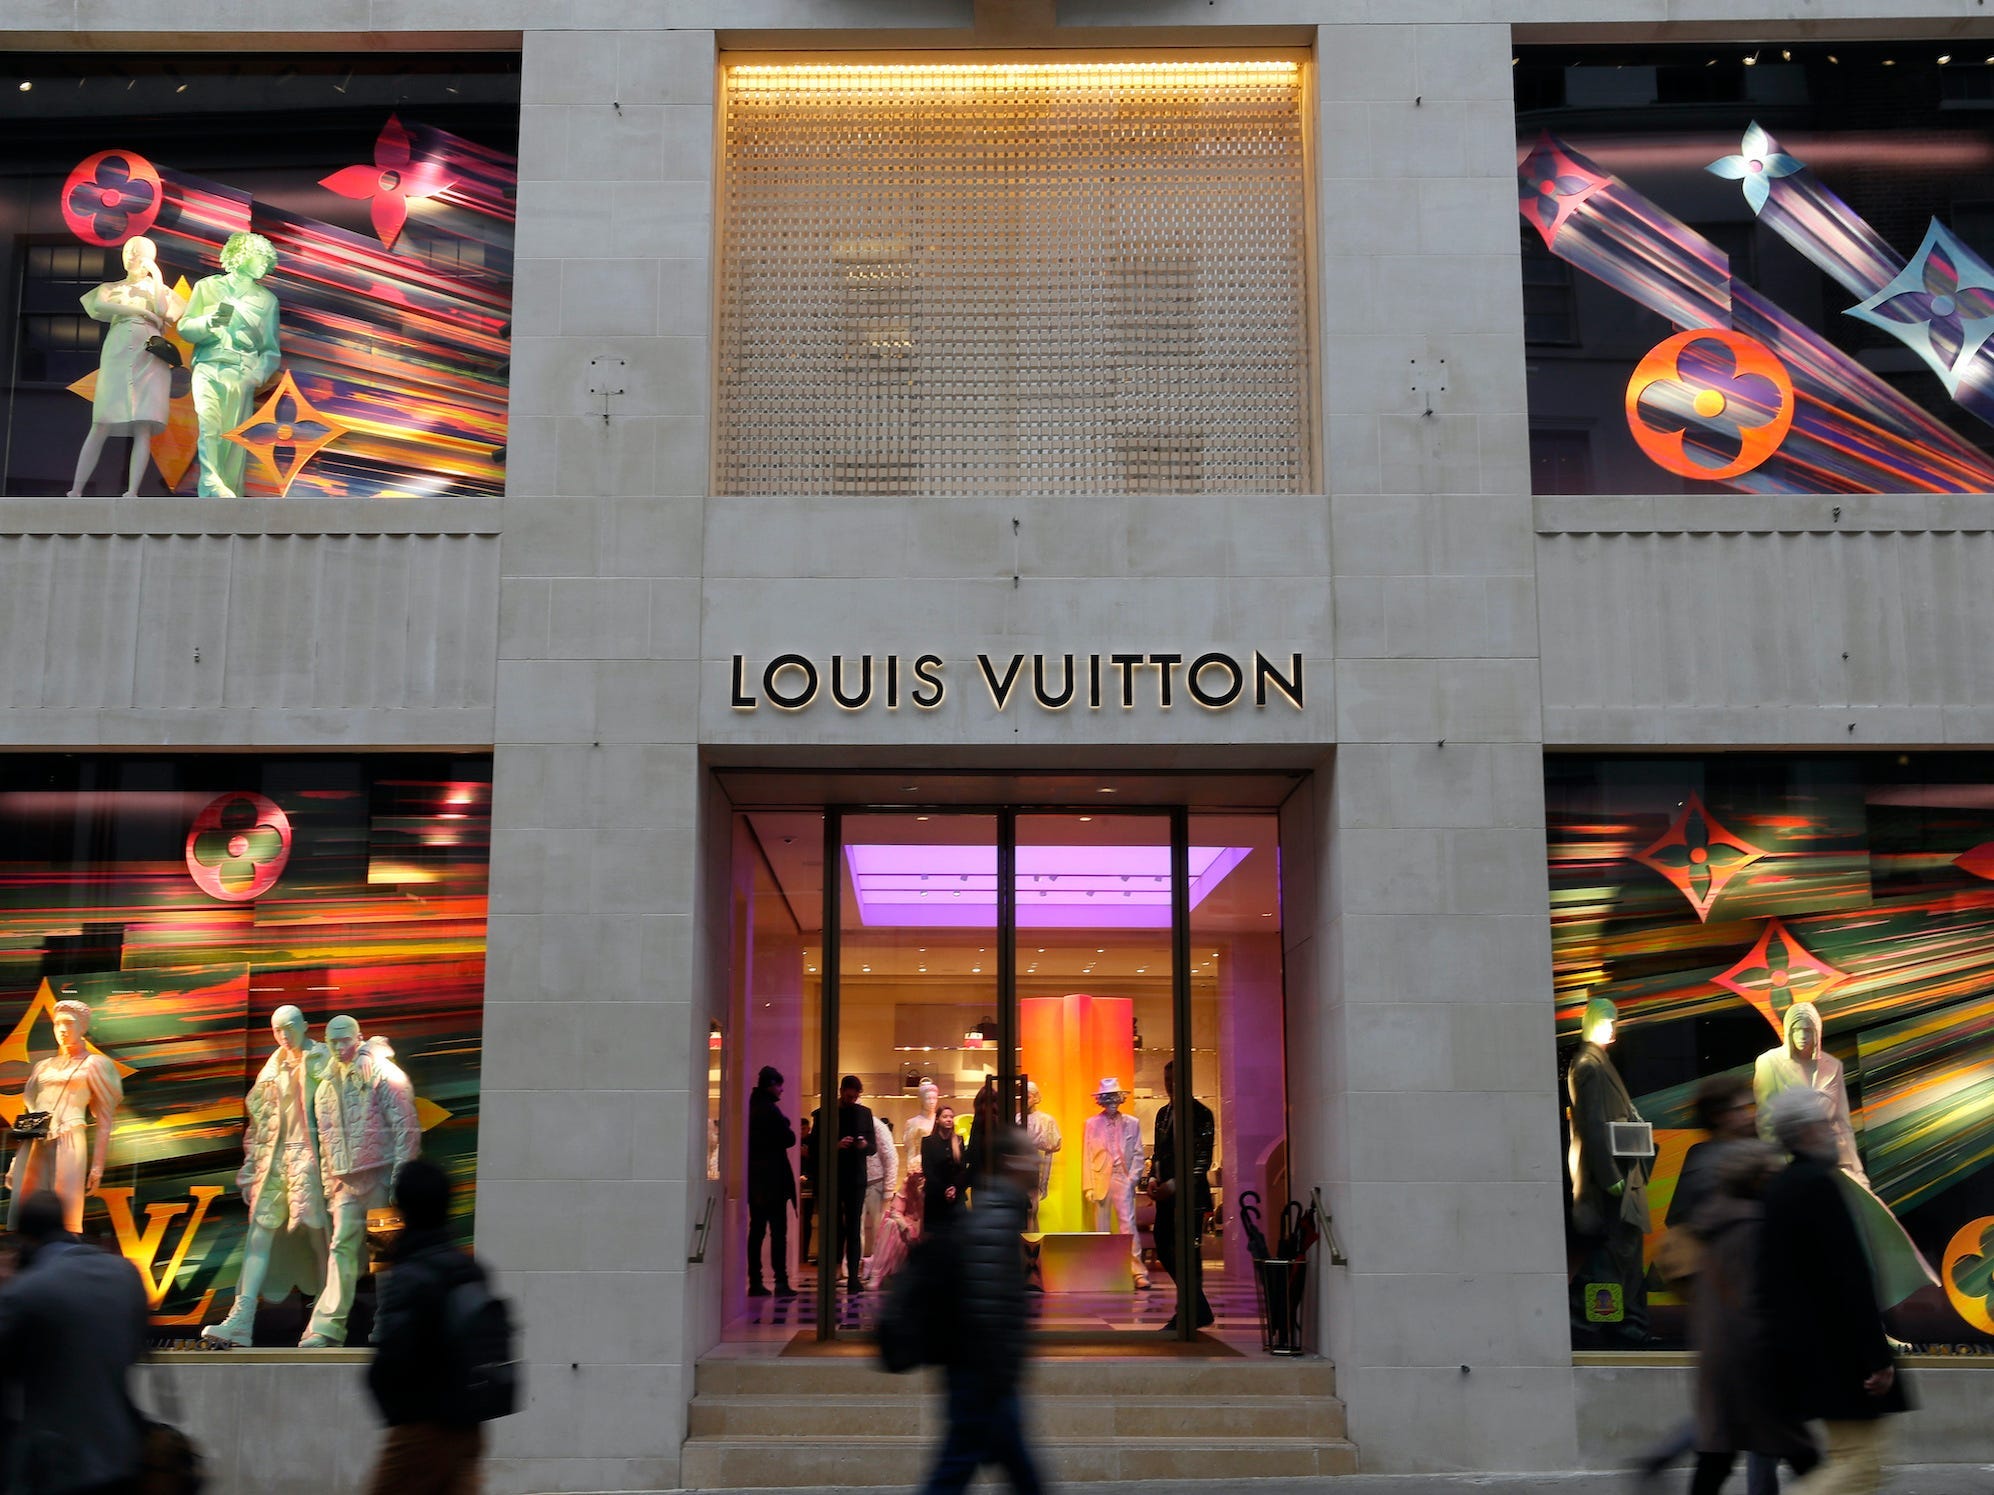 Shoppers walk by Louis Vuitton store in London with colorful window displays